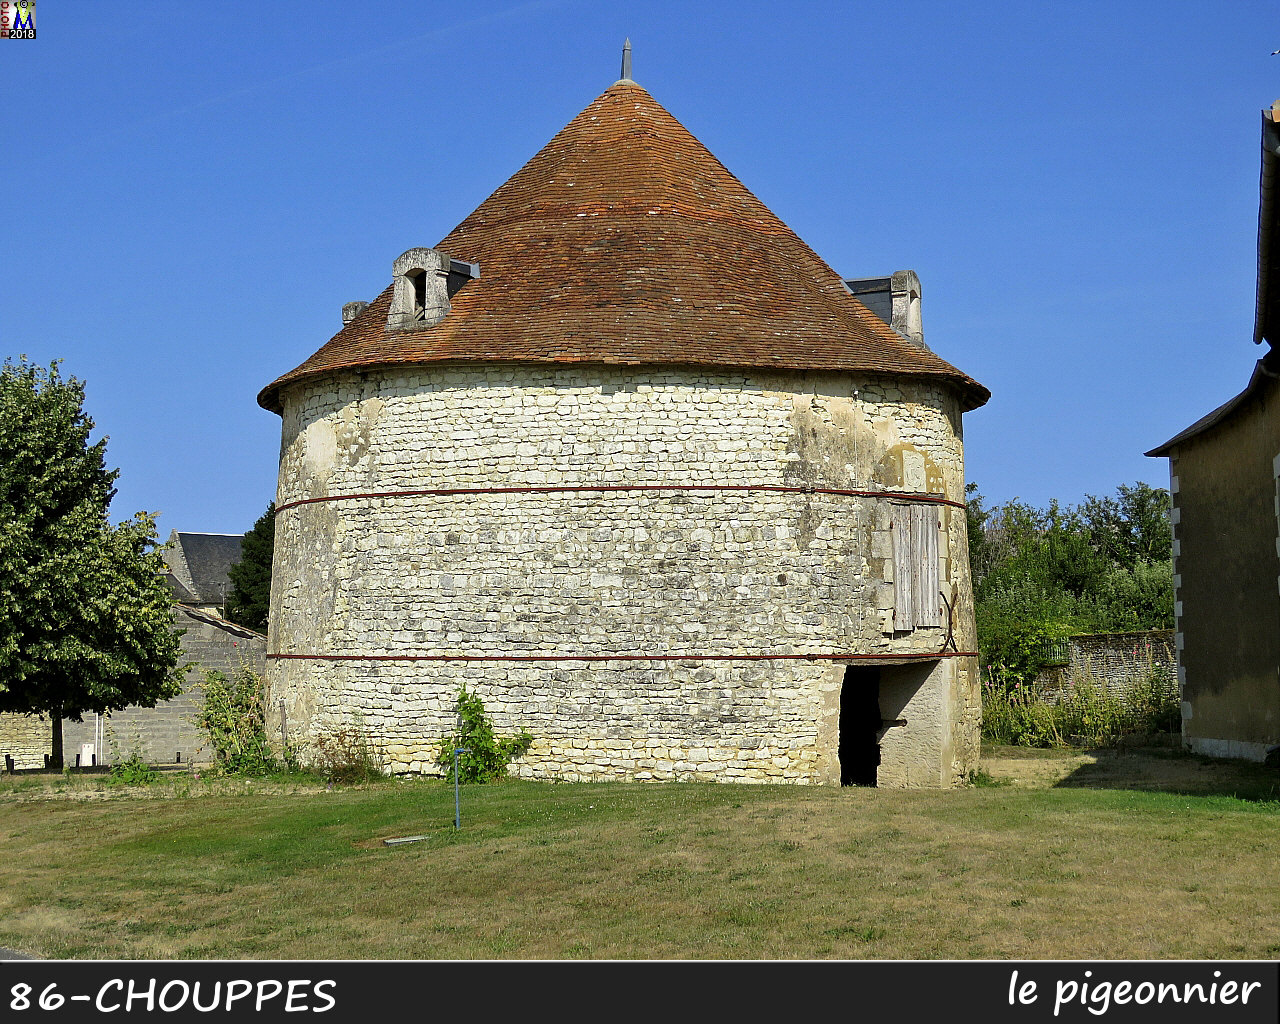 86CHOUPPES_pigeonnier_1000.jpg